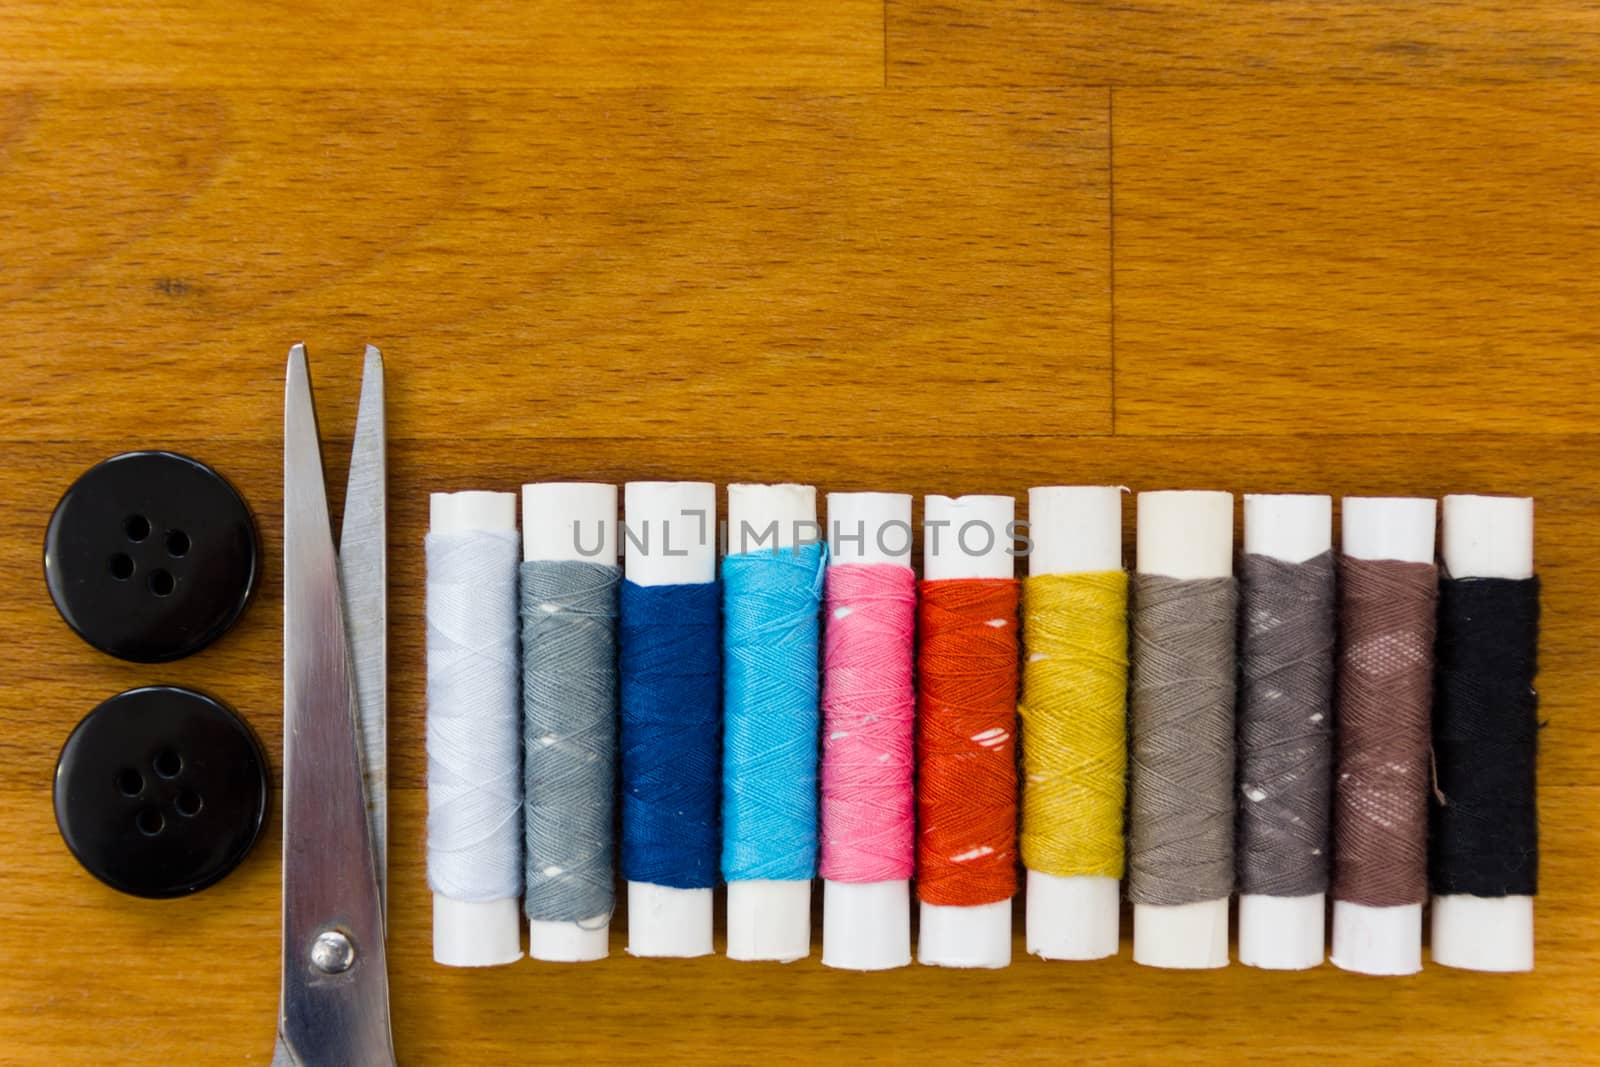 thread, needle, thimble and sewing kits are the Tailor